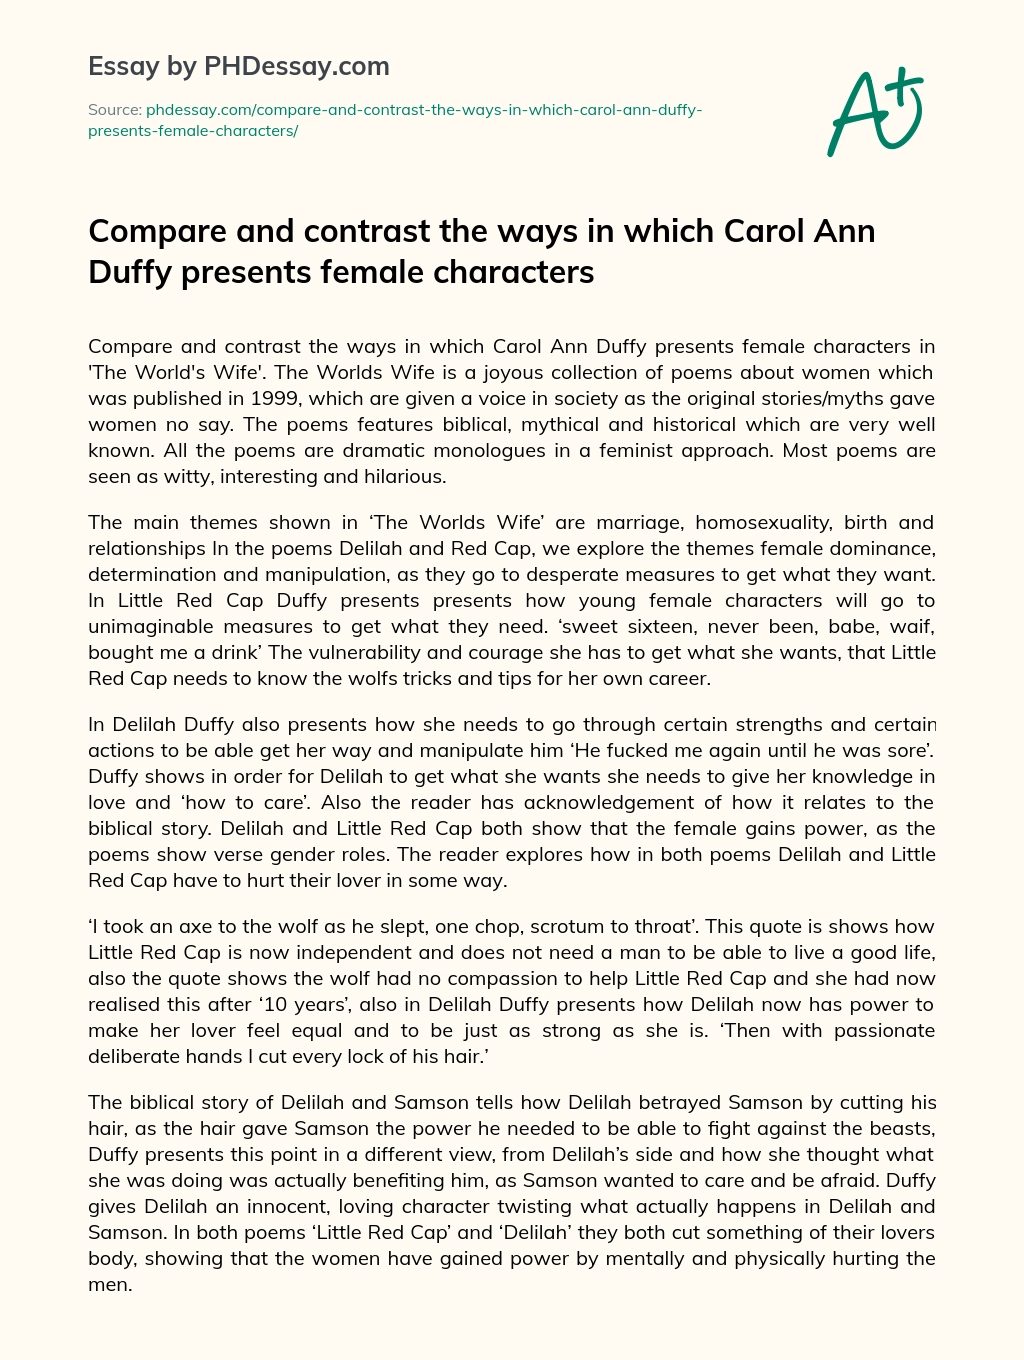 Compare and contrast the ways in which Carol Ann Duffy presents female characters essay